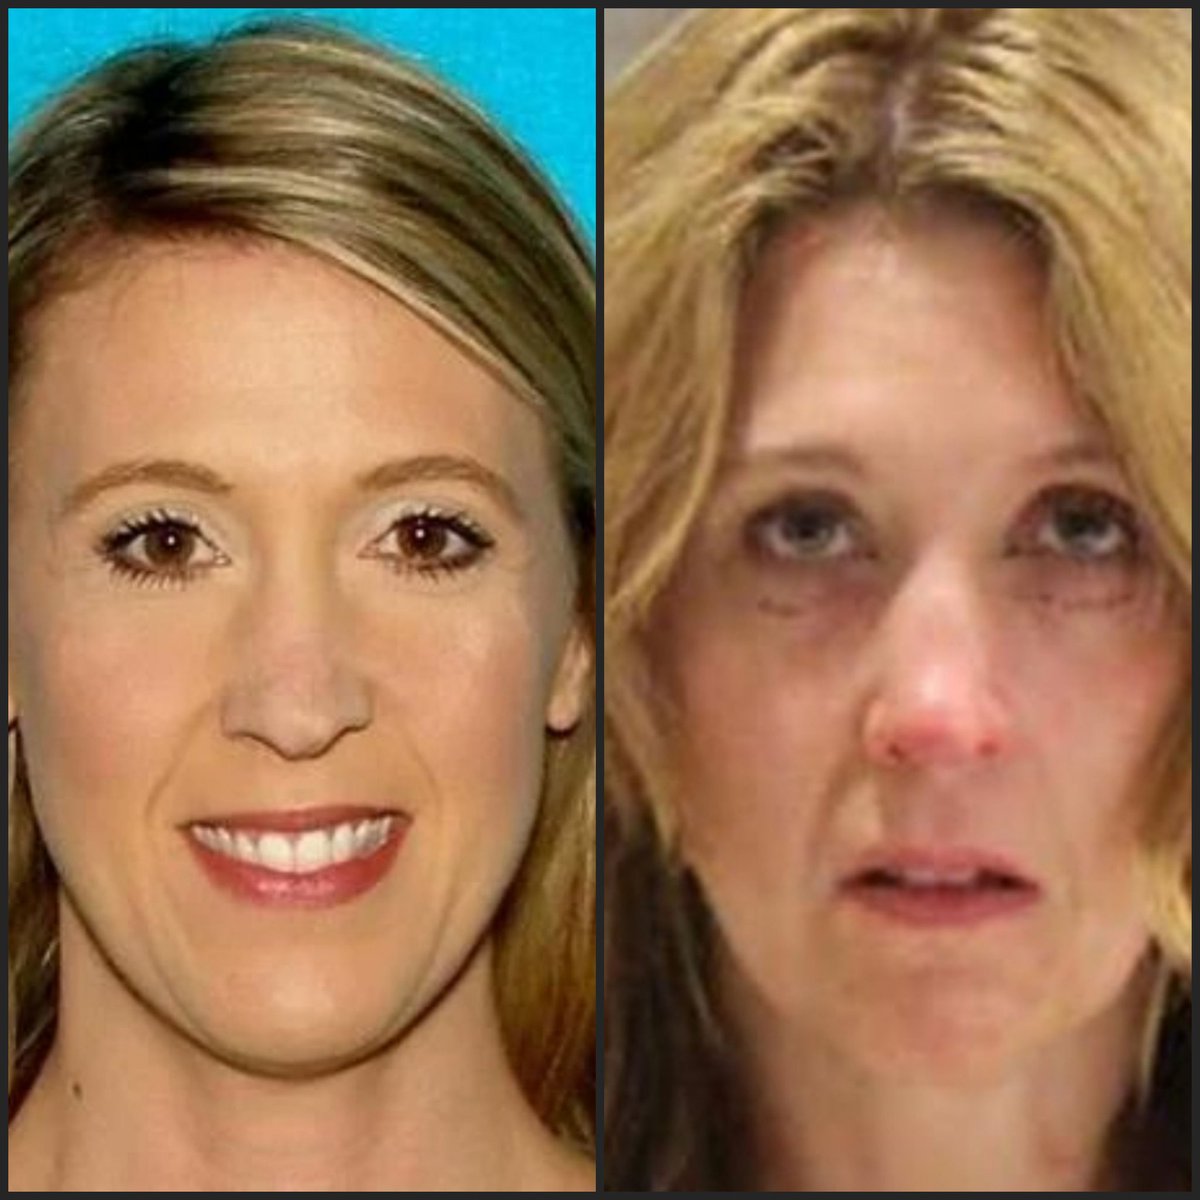 Nebraska teacher, 45, caught naked in car with teen is married to a Harvard-educated government official. Before and after.